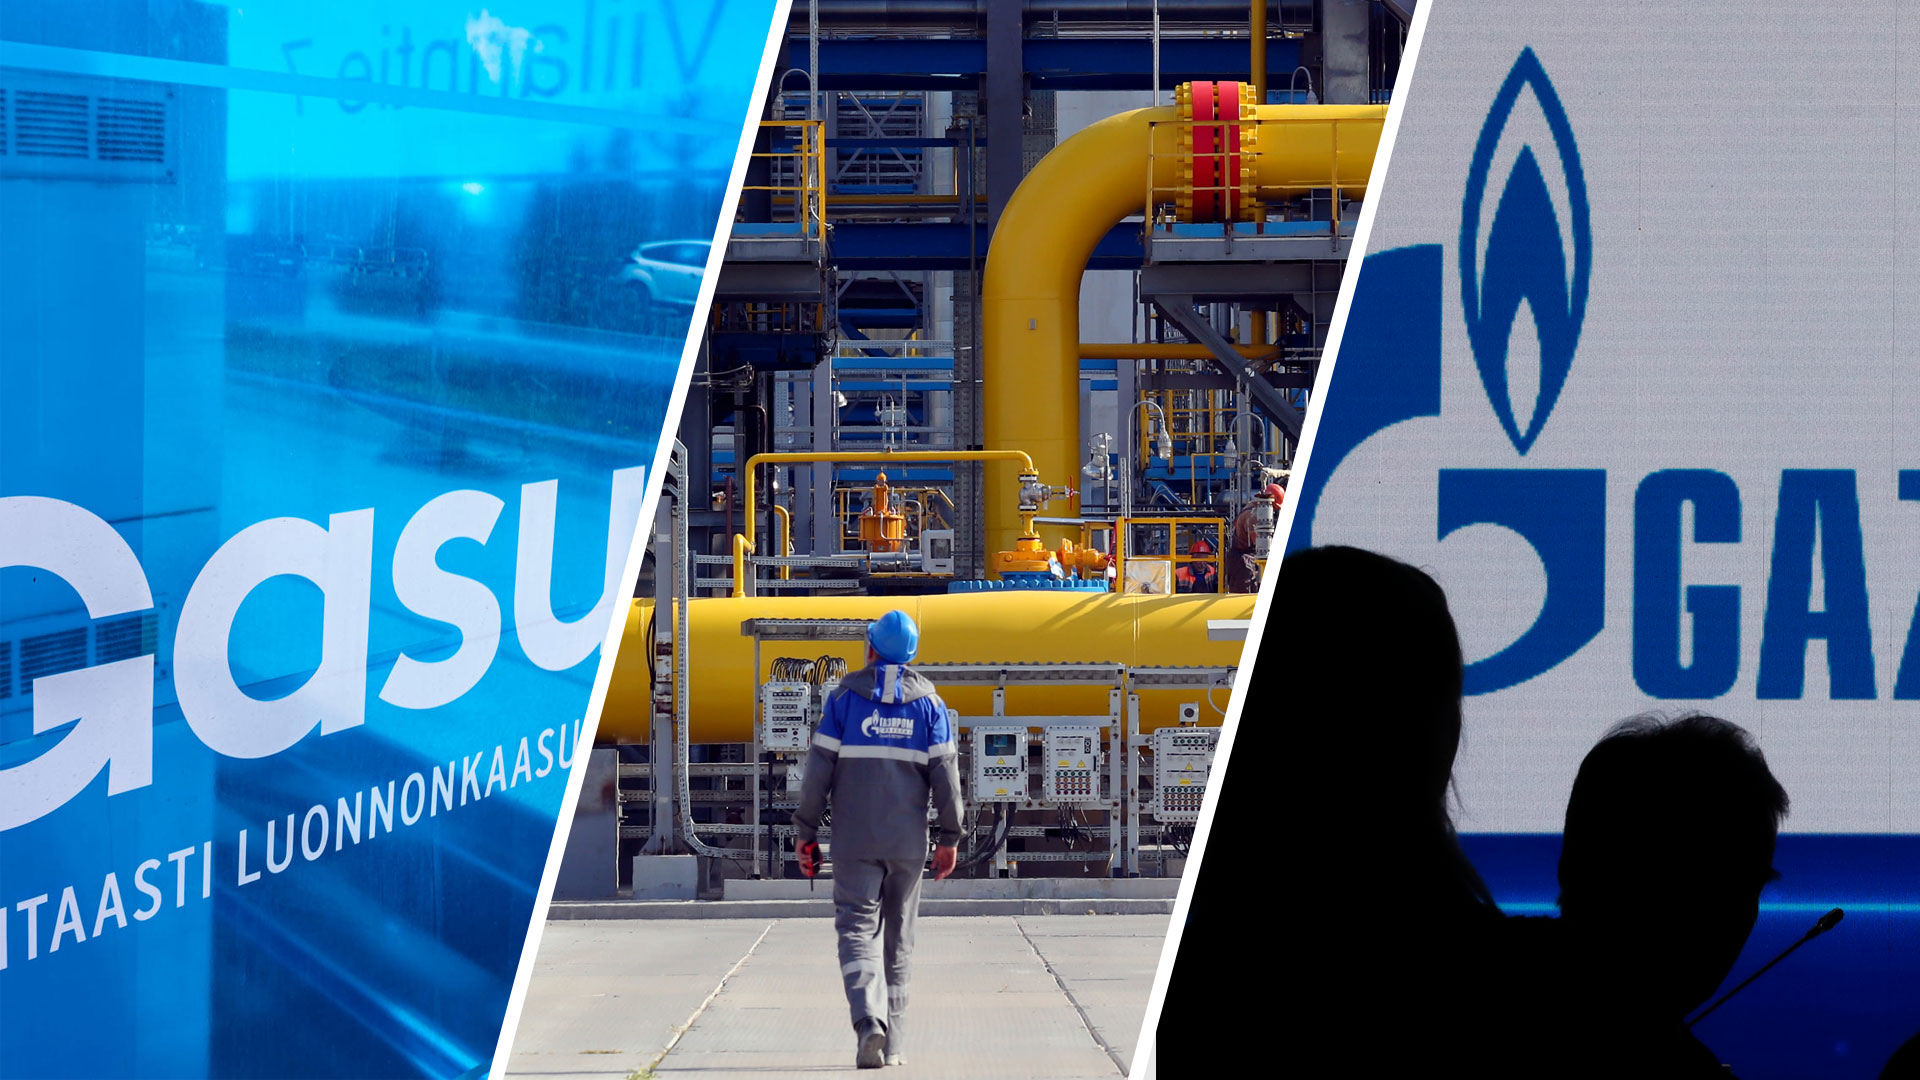 The agreements may oblige Finland to buy Russian pipeline gas or to pay regardless